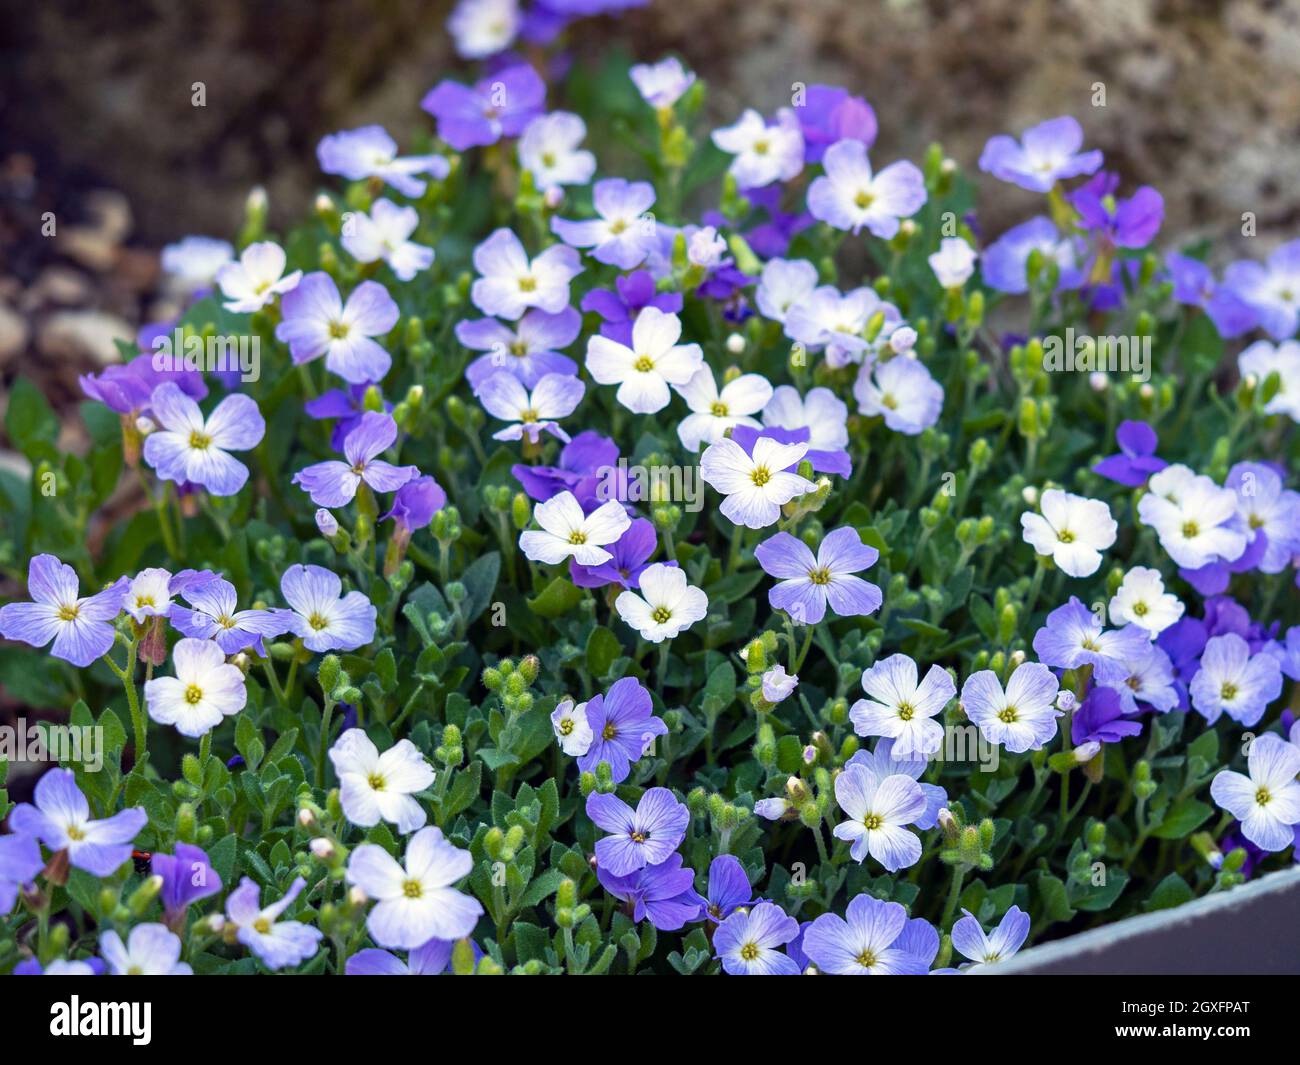 Closeup of mixed blue and white Aubrieta flowers in a garden Stock Photo